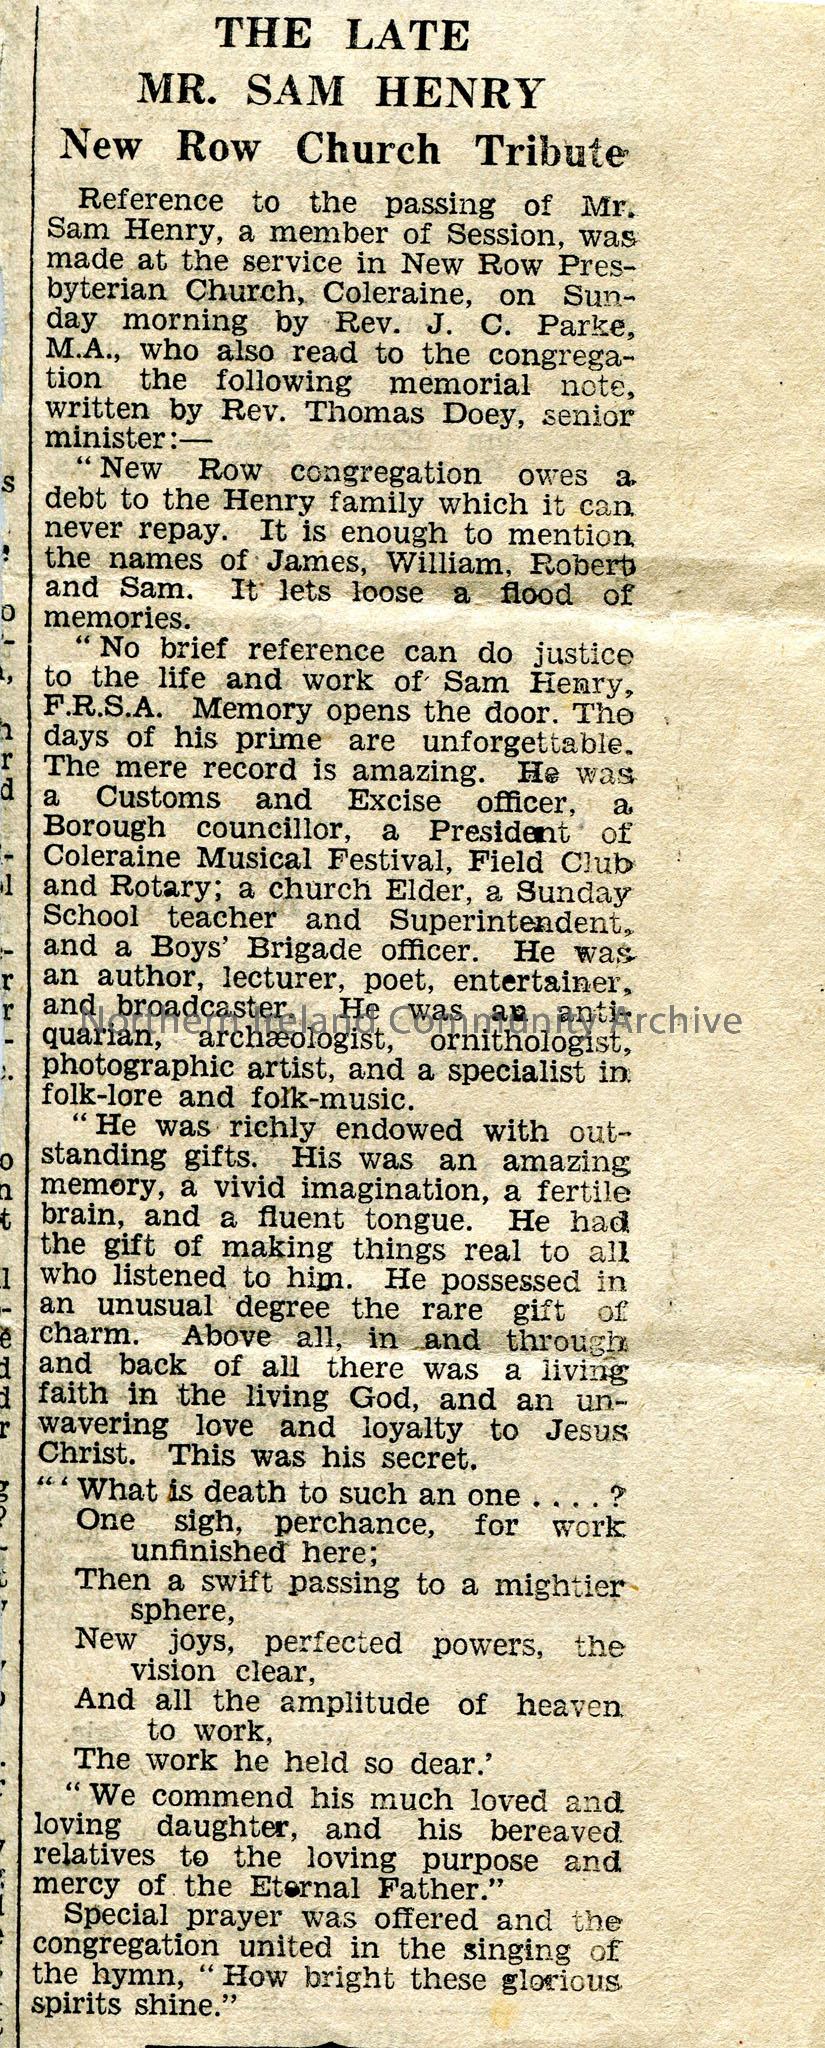 Sam Henry obituary (6), Maimie Henry (nee Liken) obituary (1), Miss Kathleen A.Liken obituary (1) – clippings from local newspapers contained within a… – scan005